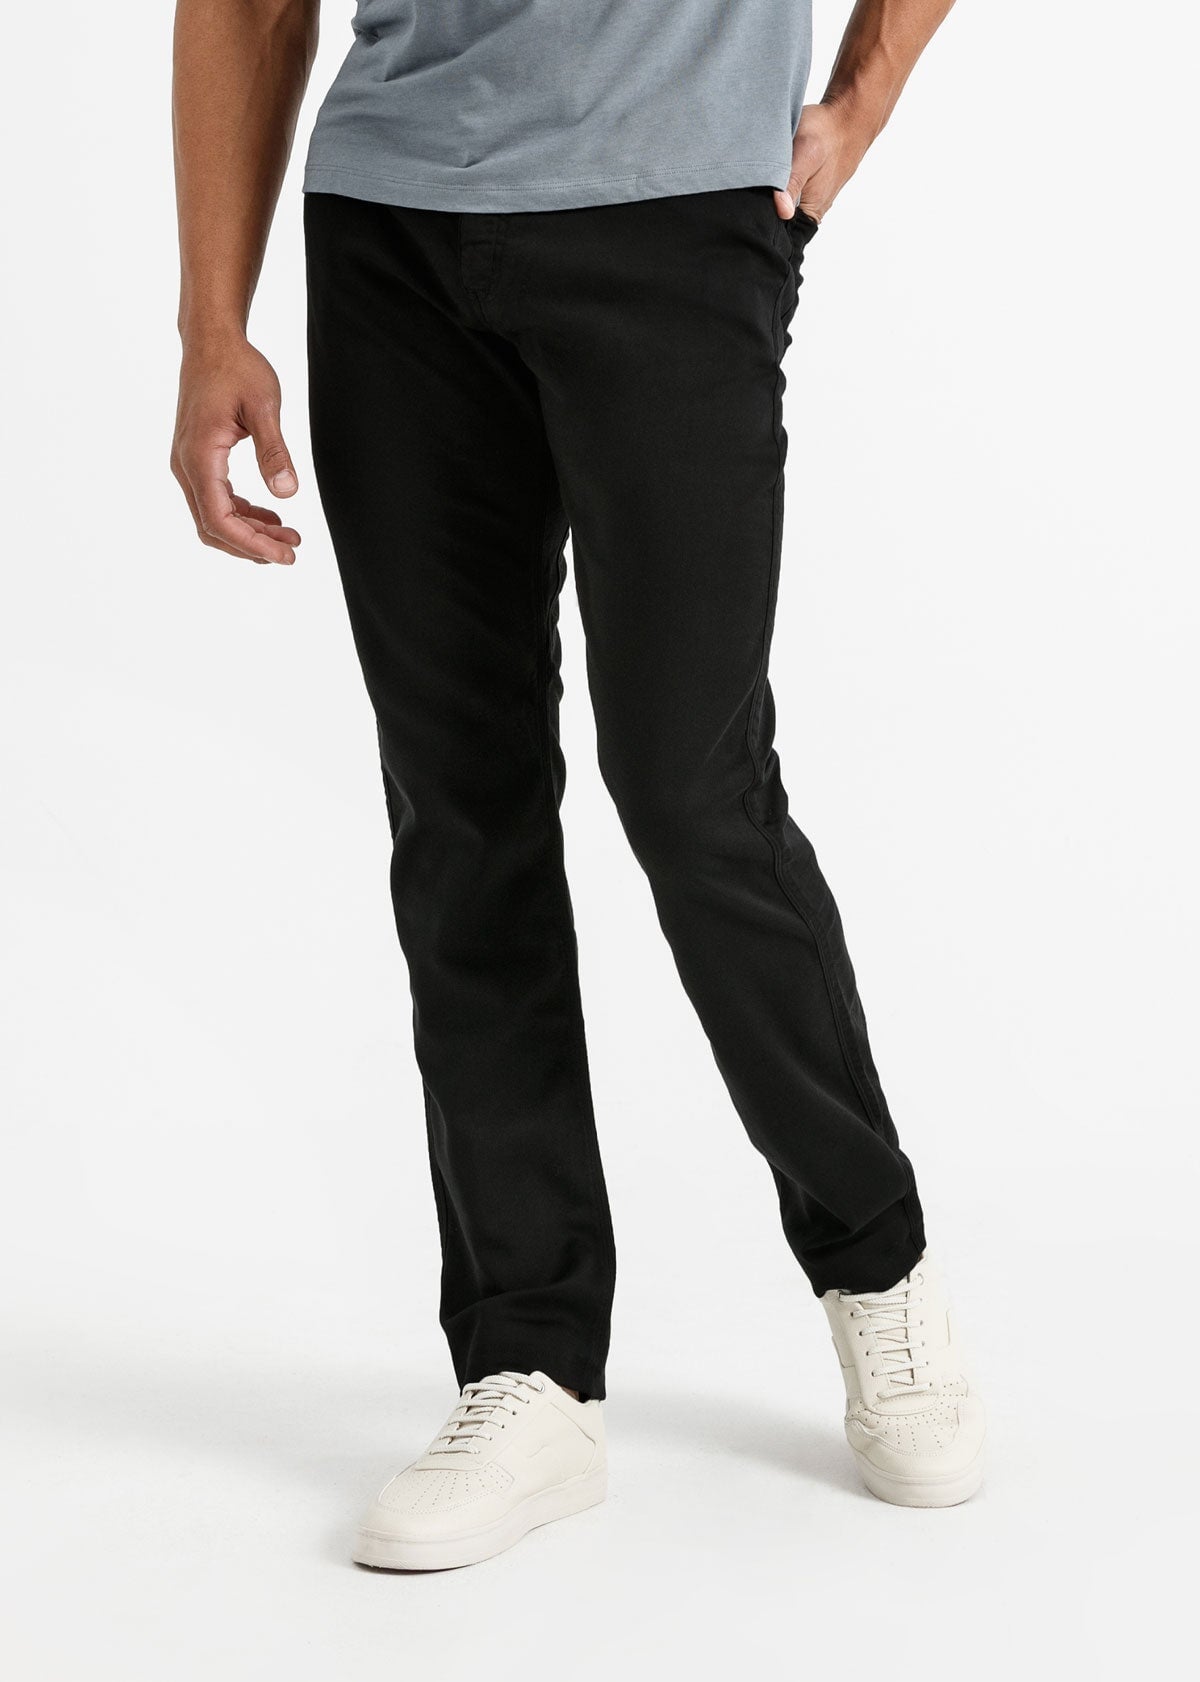 man wearing a black Relaxed Fit Sweatpant front